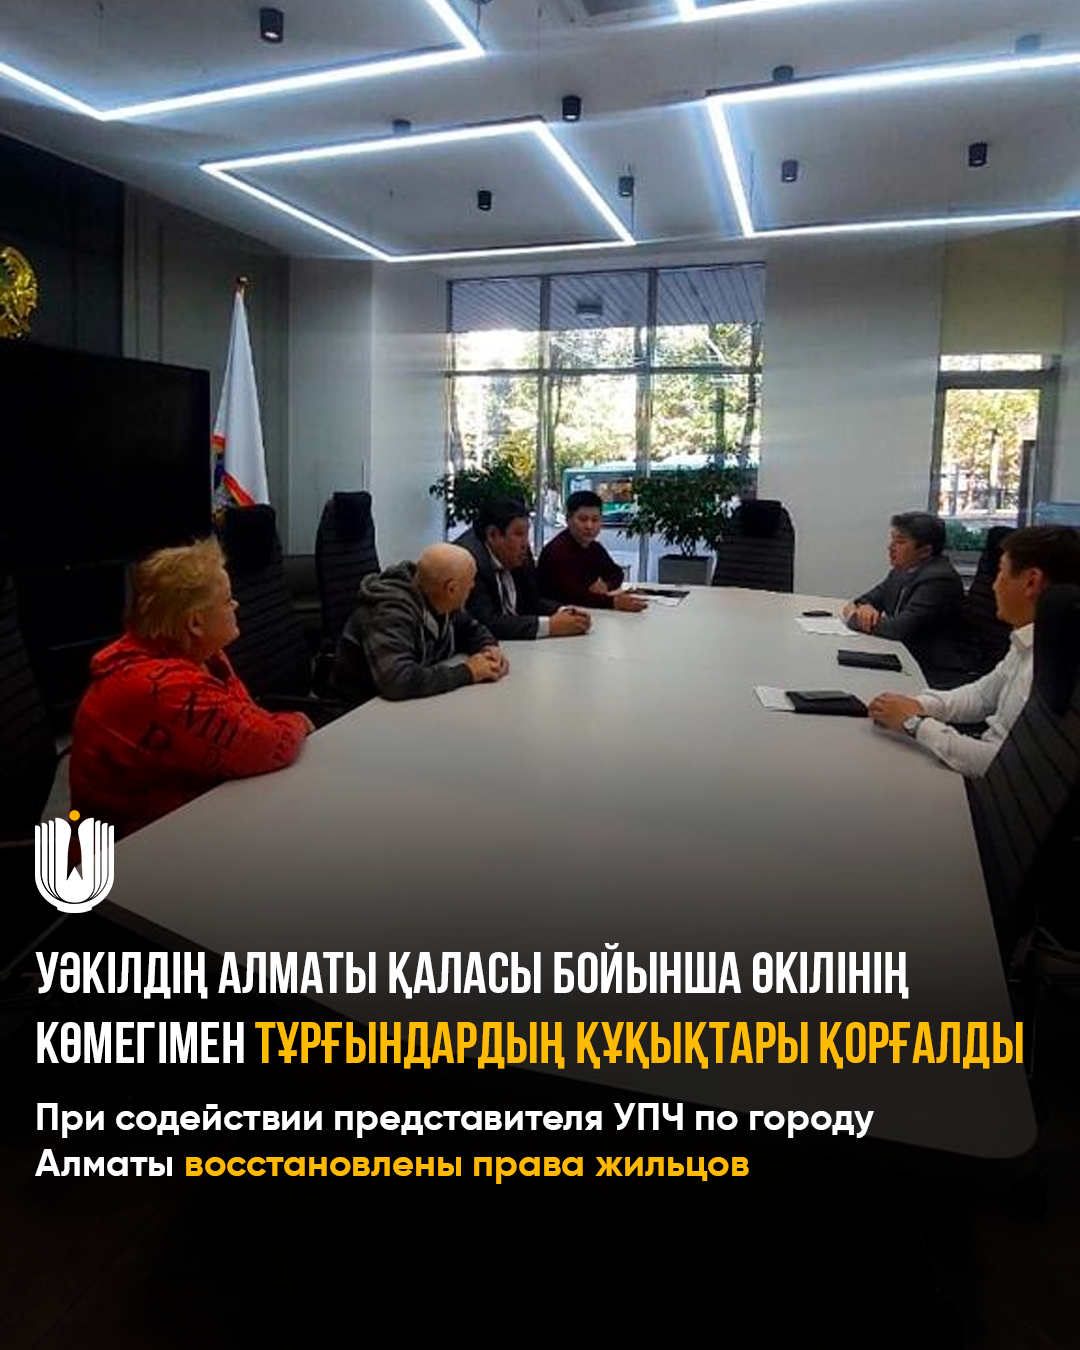 The rights of residents were restored with the assistance of a representative of the Almaty City Human Rights Centre